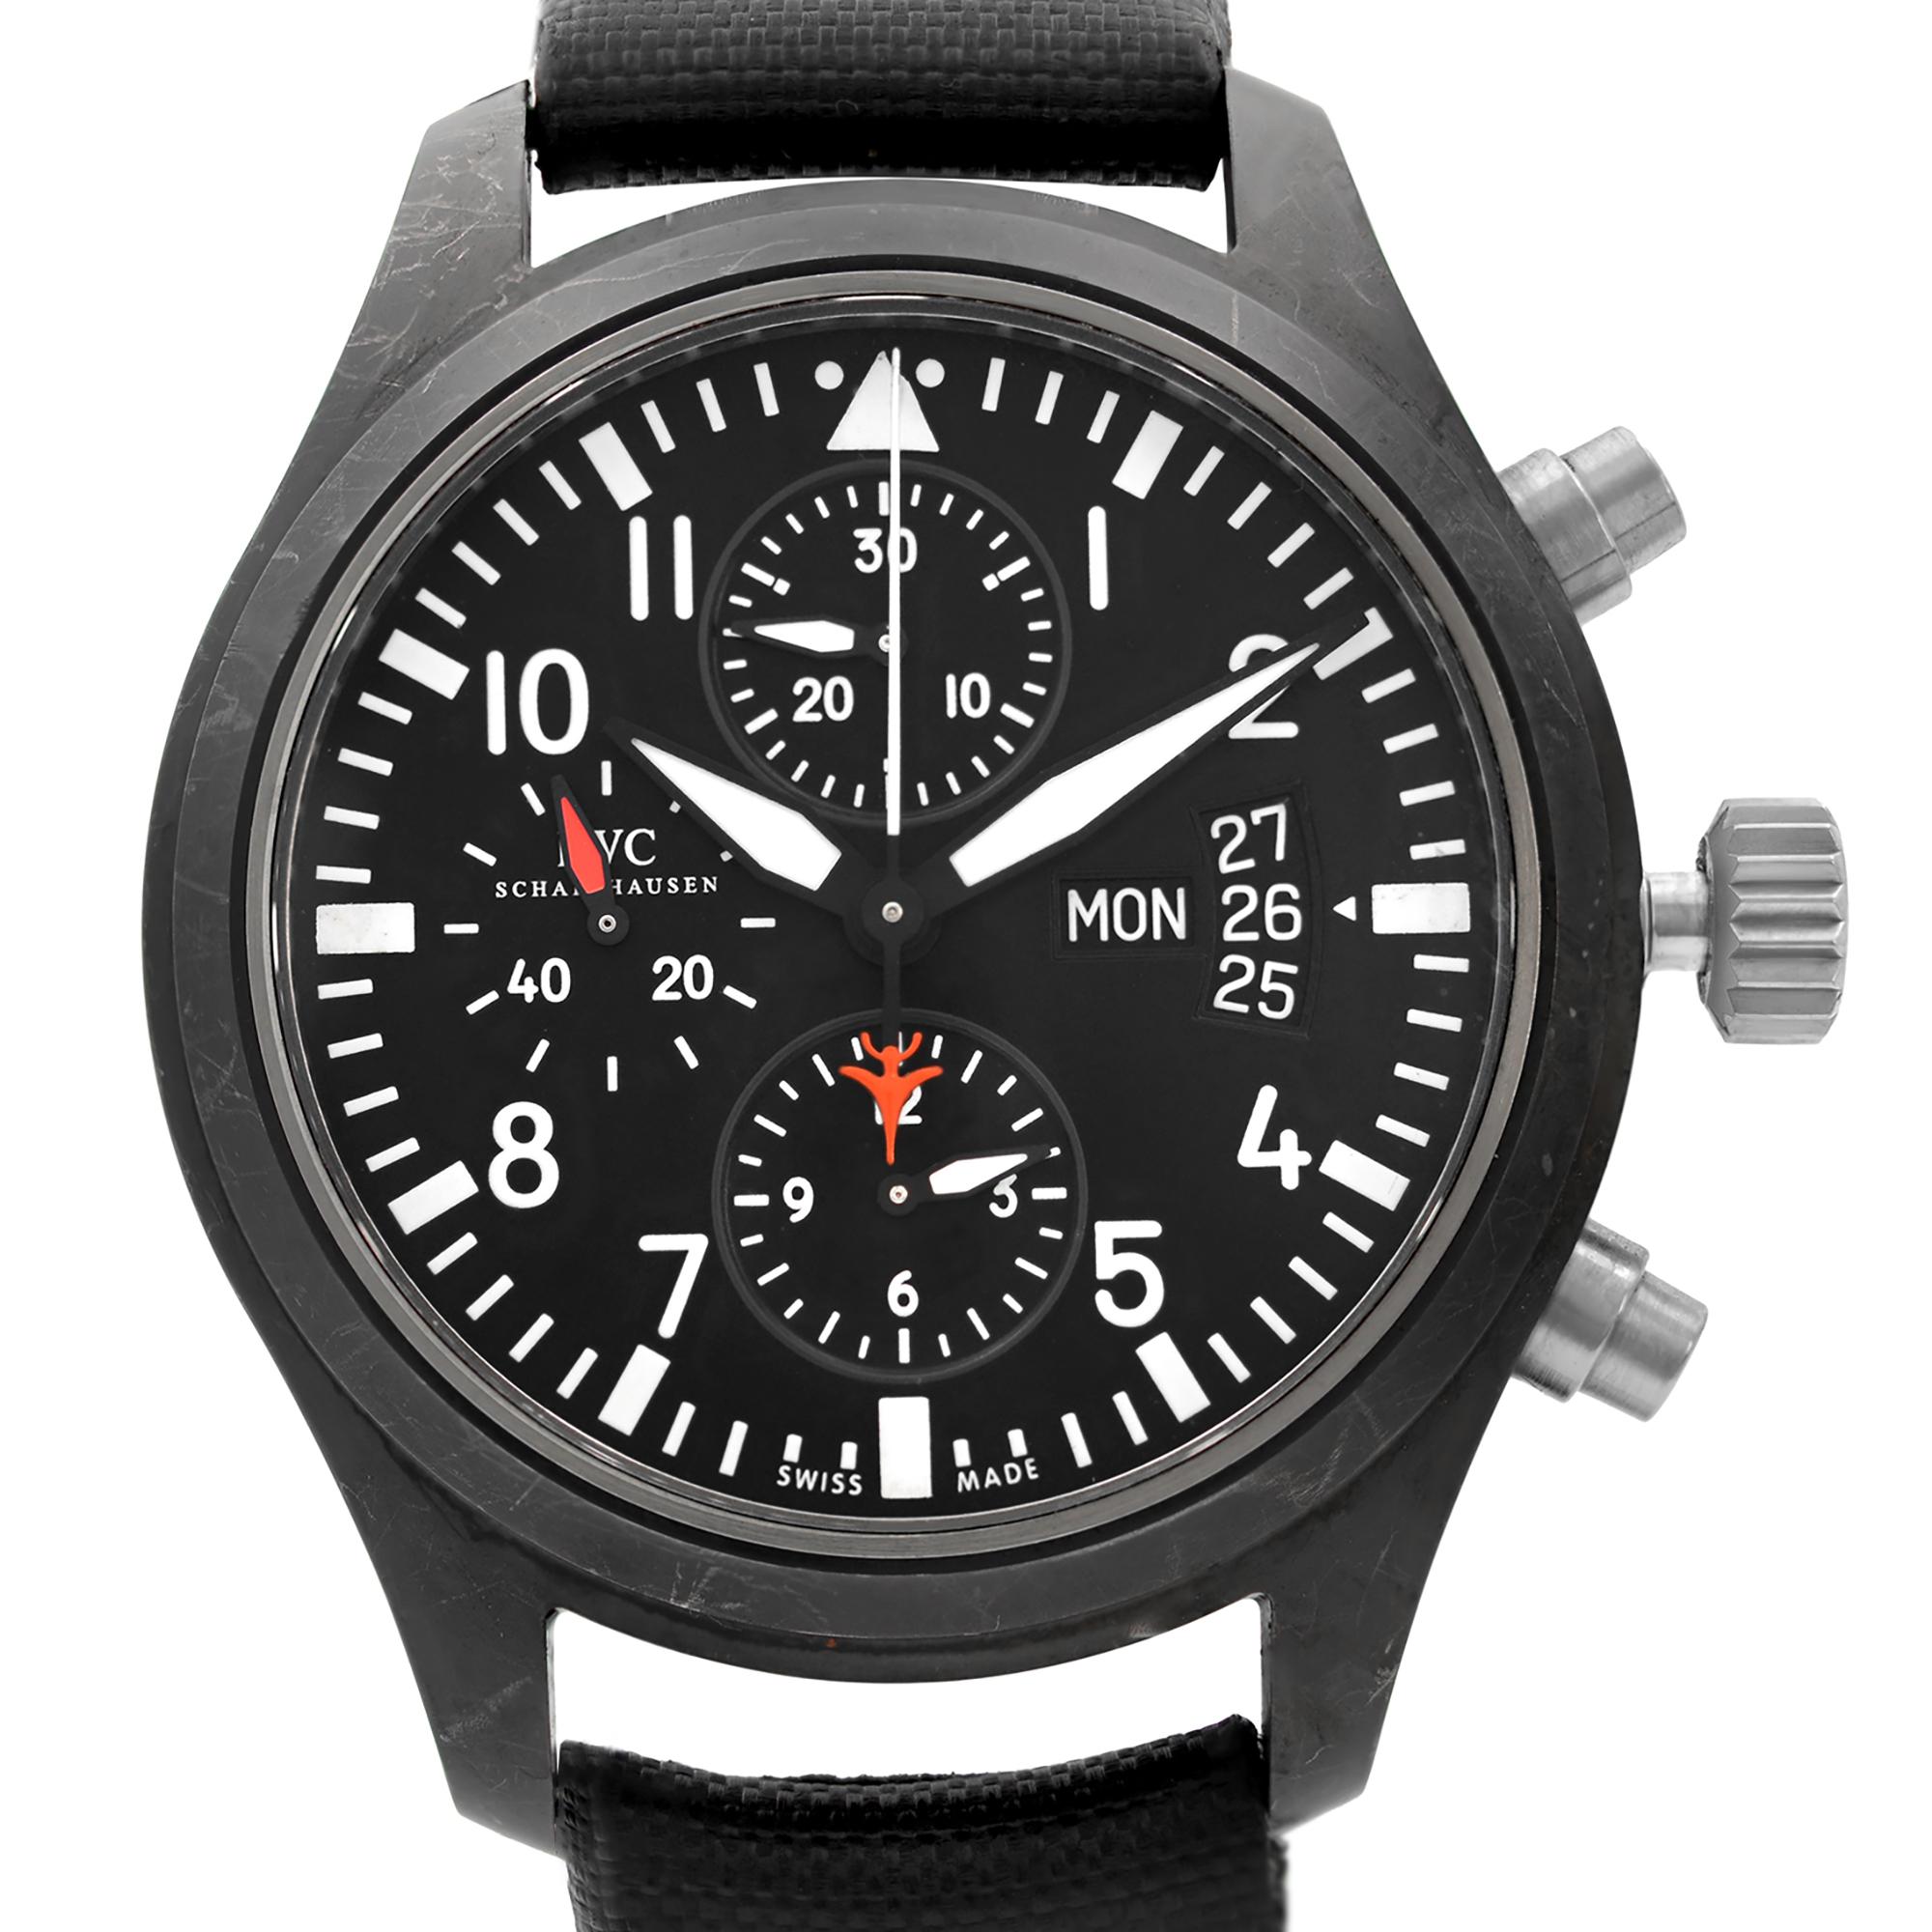 Pre-owned IWC Pilots Top Gun 44mm Titanium Black Dial Automatic Men's Watch. The band is unworn. The Watch Case and Bezel Show Heavy Wear Signs and Signs as Seen in the Pictures. Original Box and Papers are Included. Covered by 1-year Chronostore